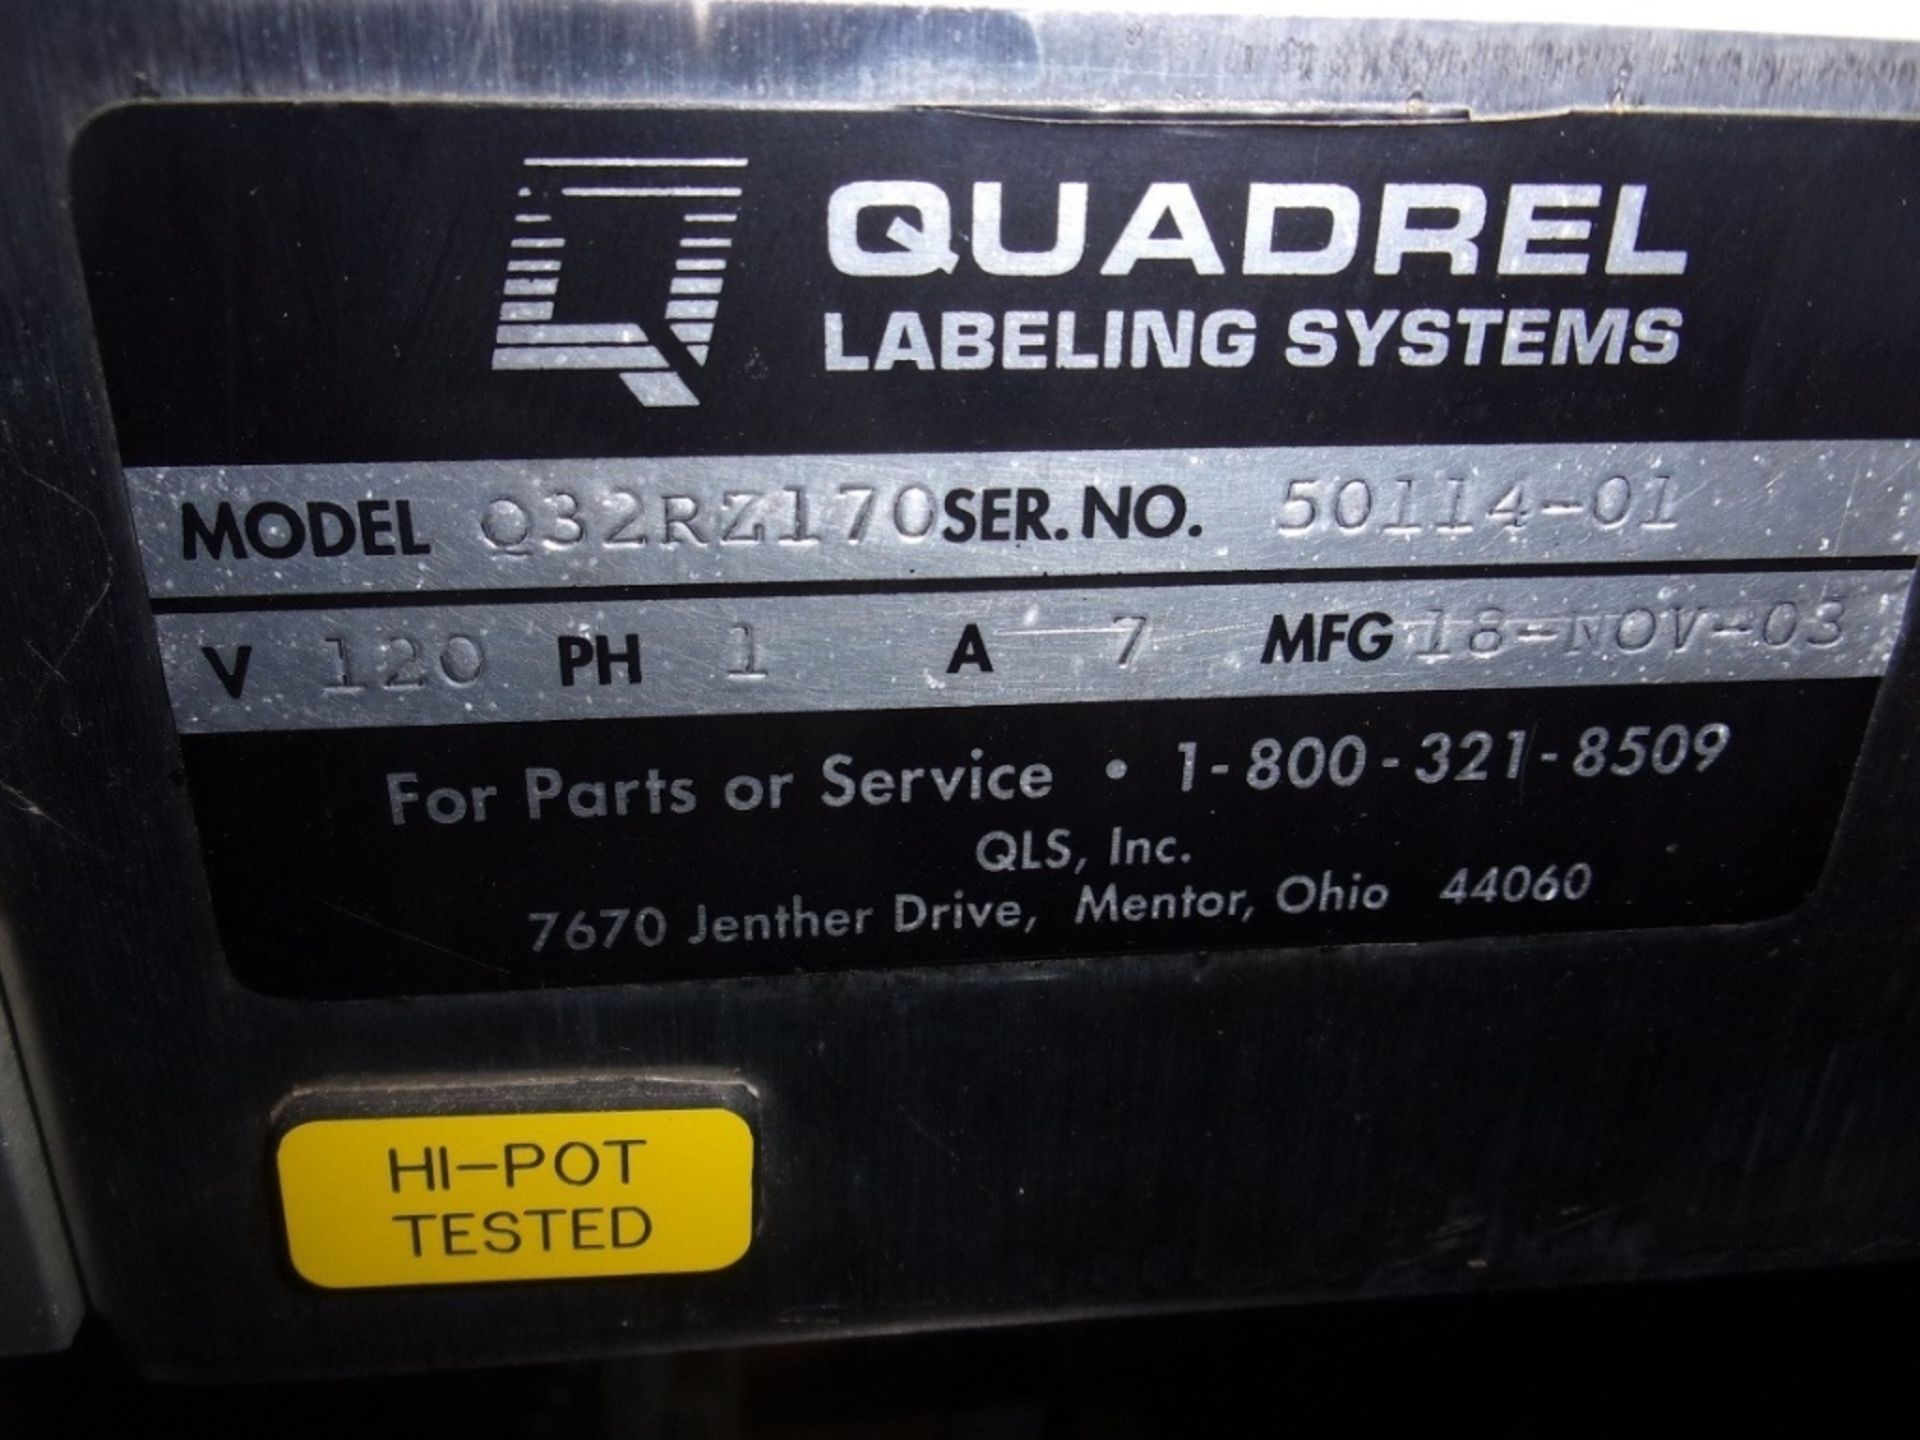 Quadrell Label Applicator, Model Q32RZ170, S/N 50114-01 (mfg 11-18-023) for Palletized Skids with - Image 9 of 9